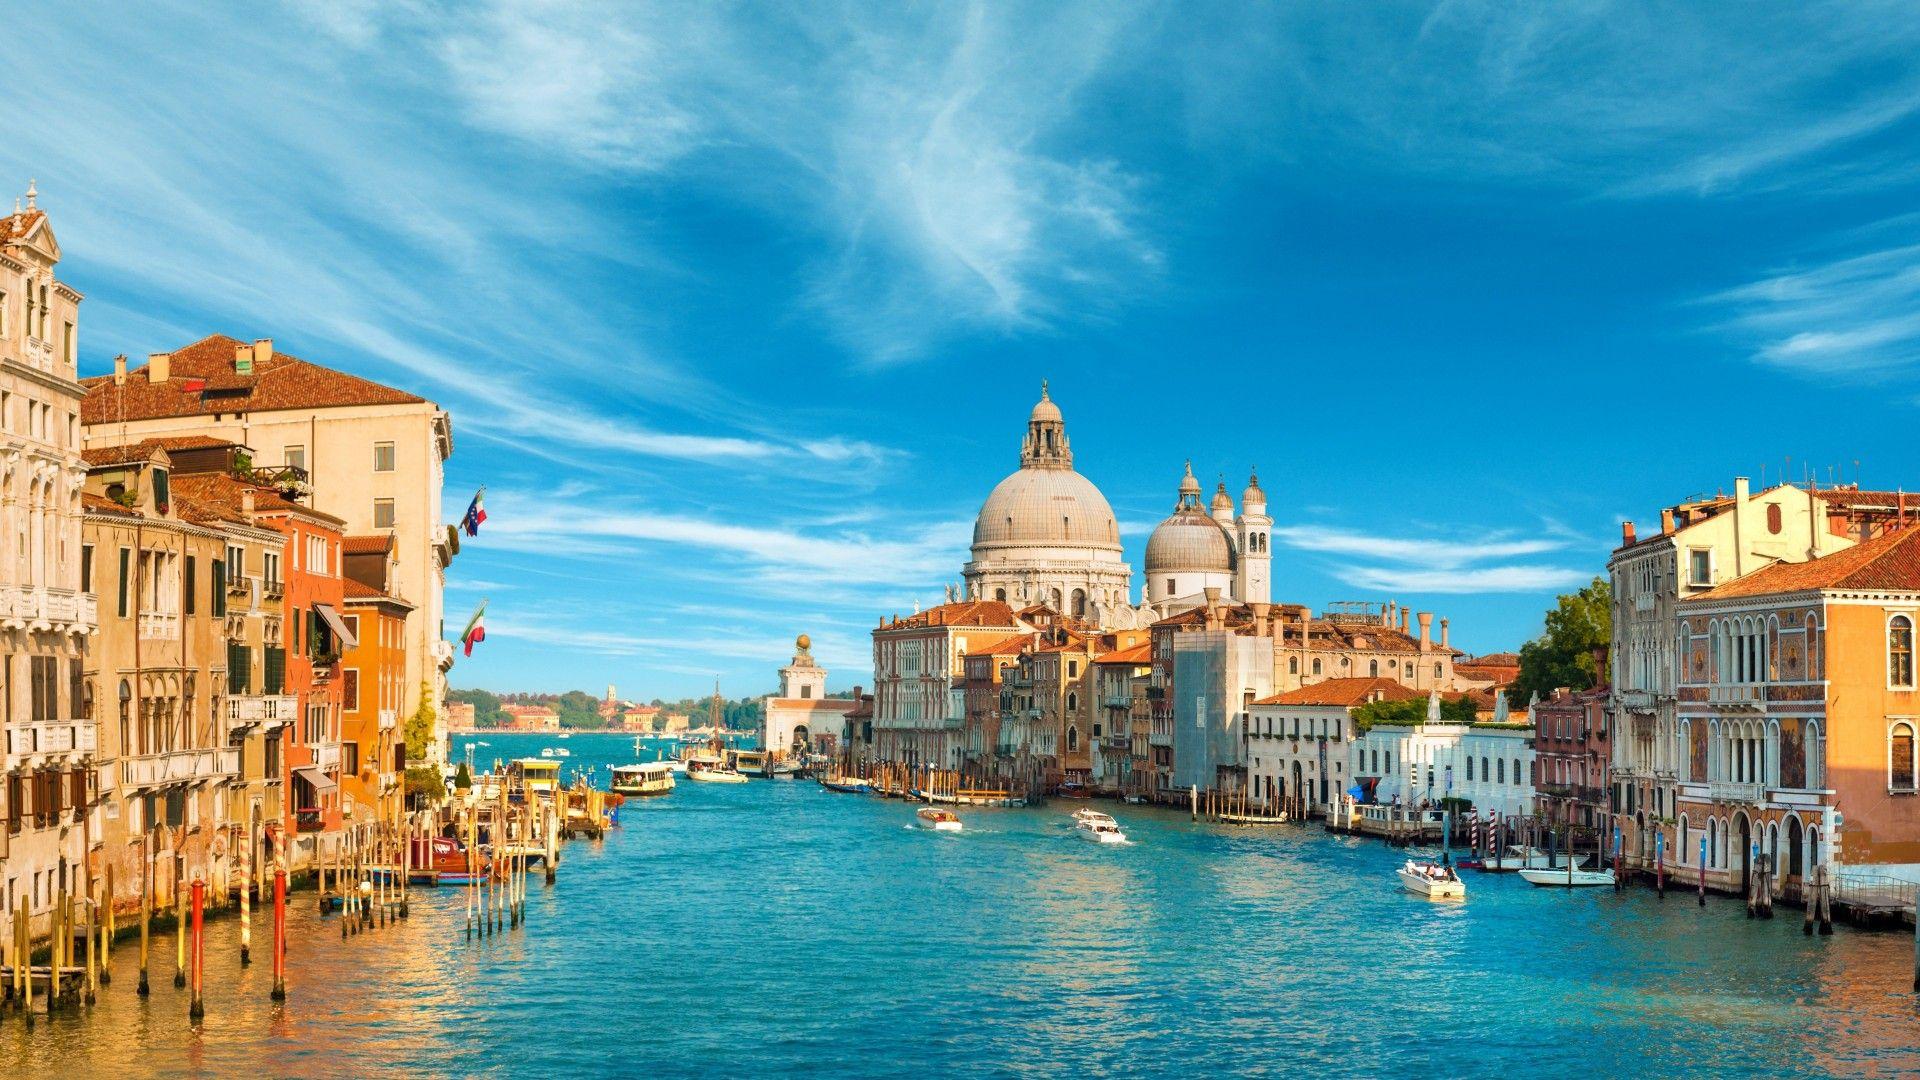 Gallery: Picture Of Venice Italy Scenery, Art Gallery